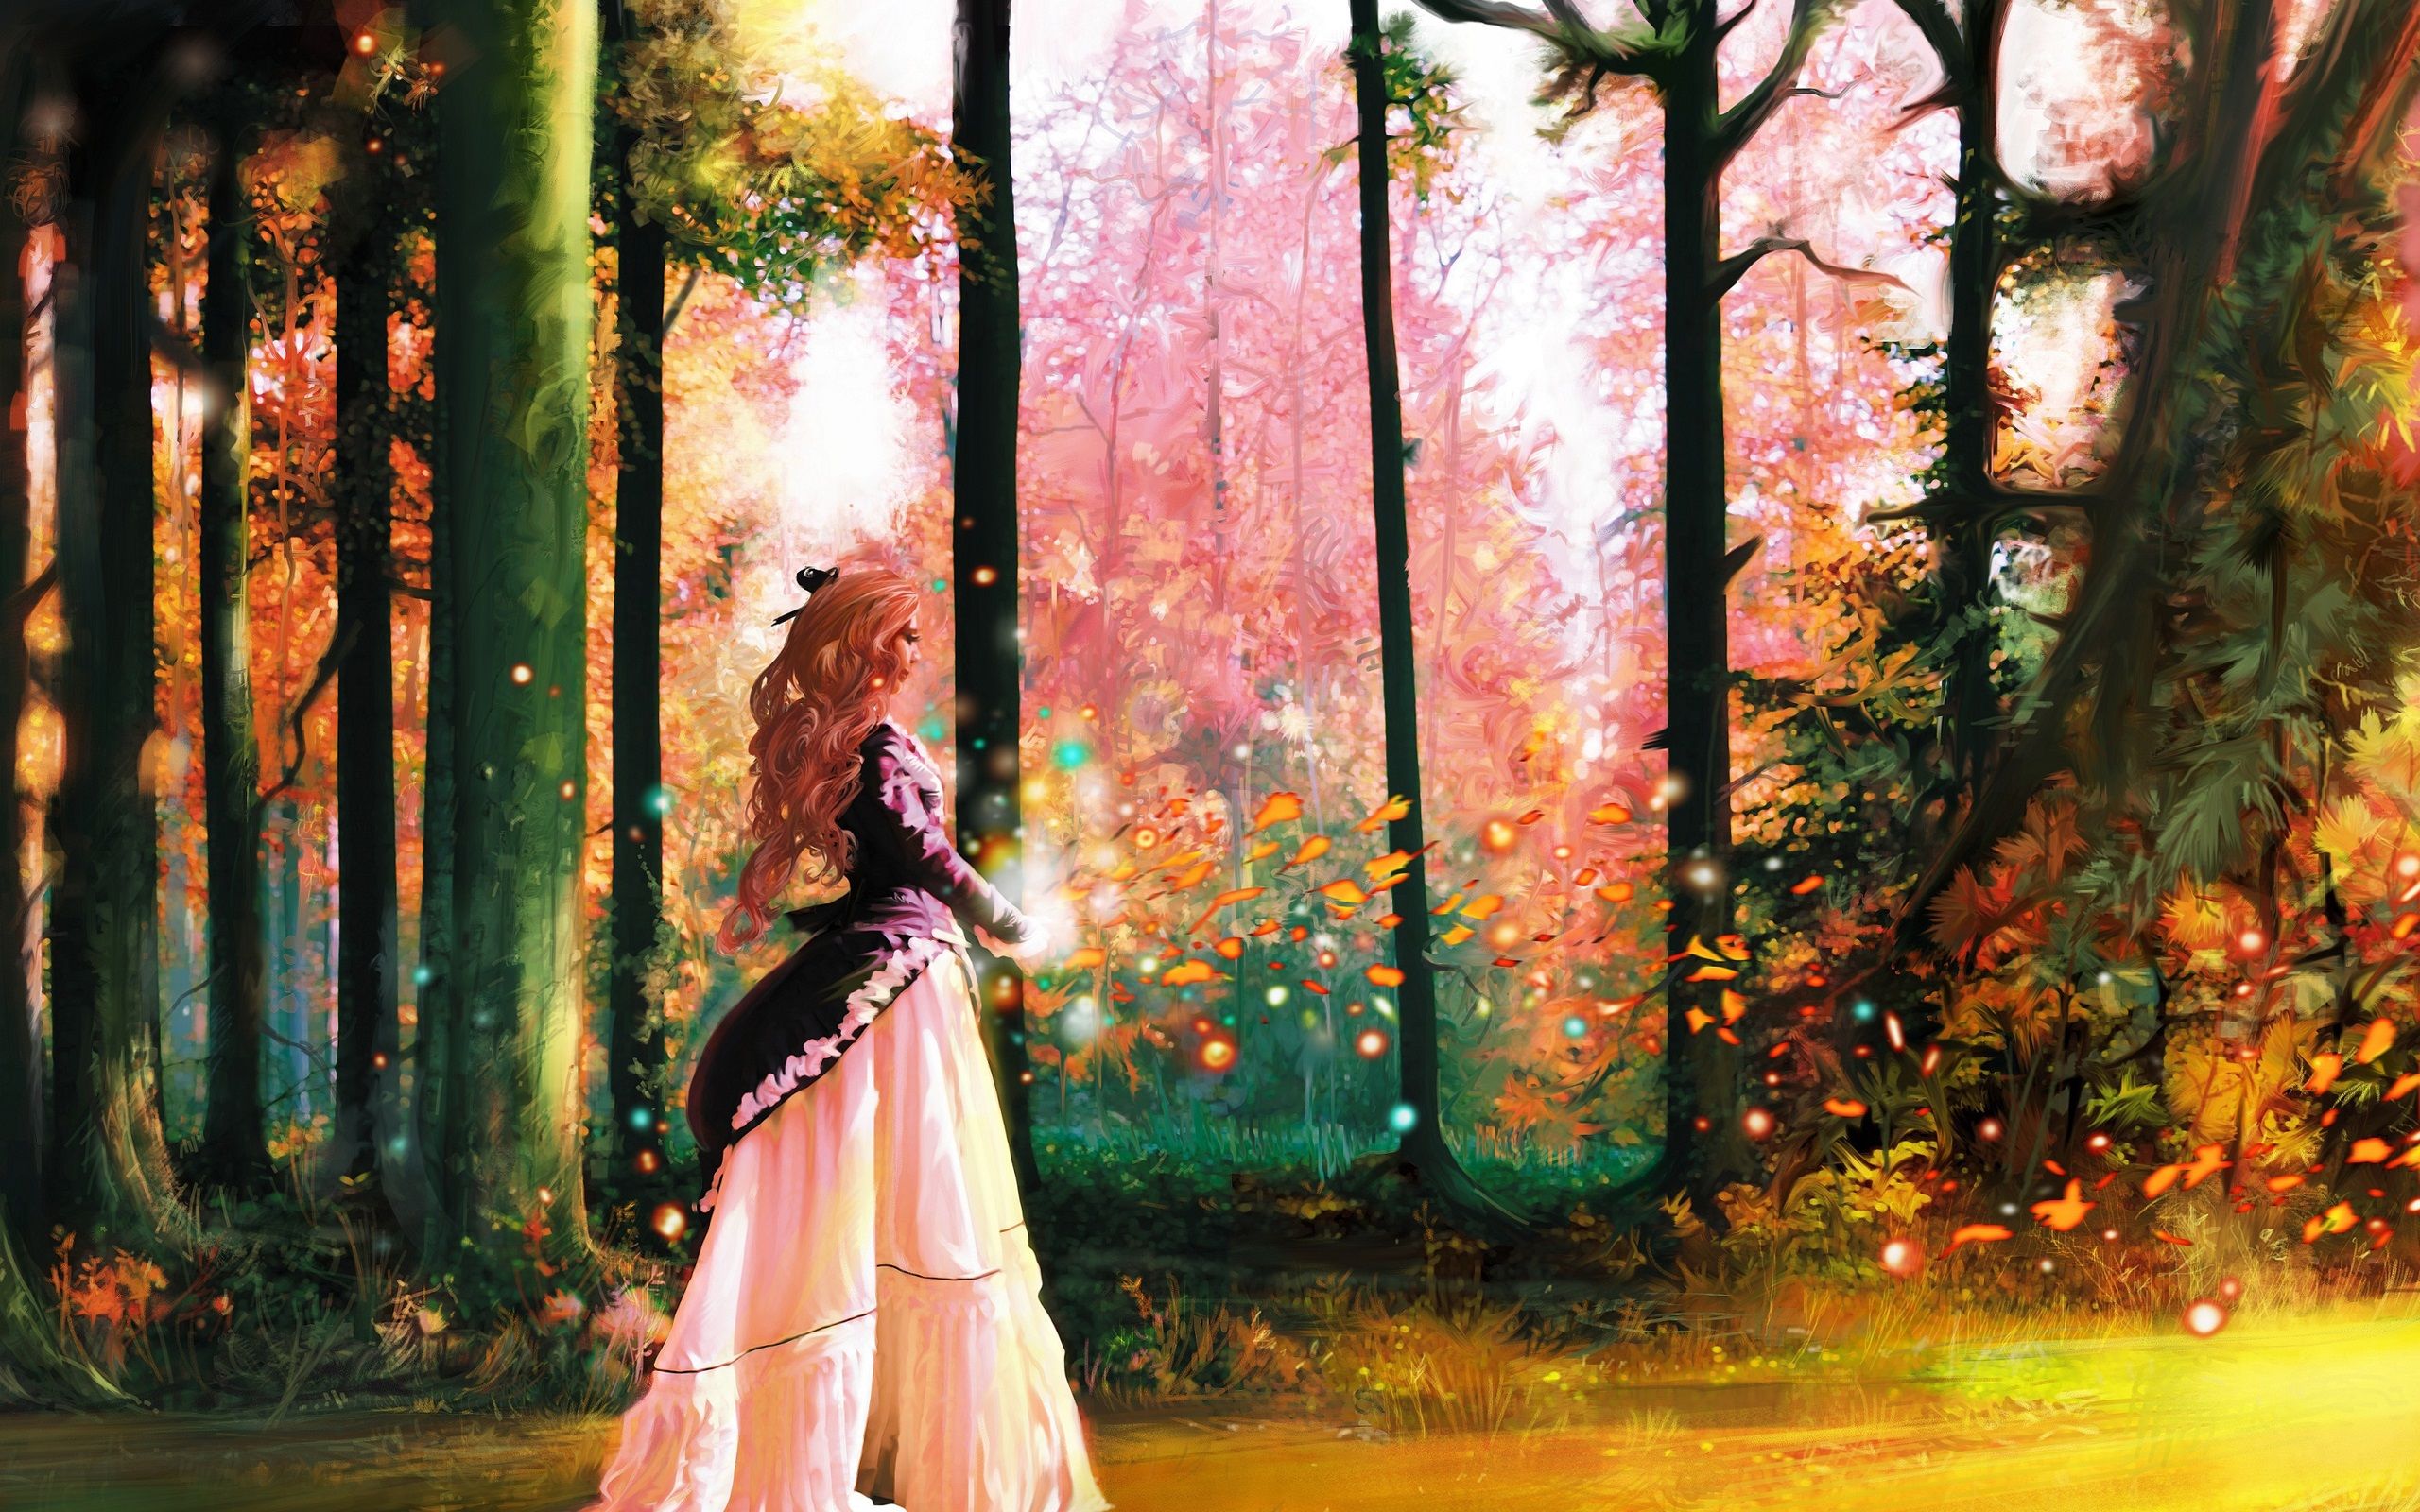 Wallpaper Art picture, forest, girl, trees, magic, colorful 2560x1600 HD Picture, Image